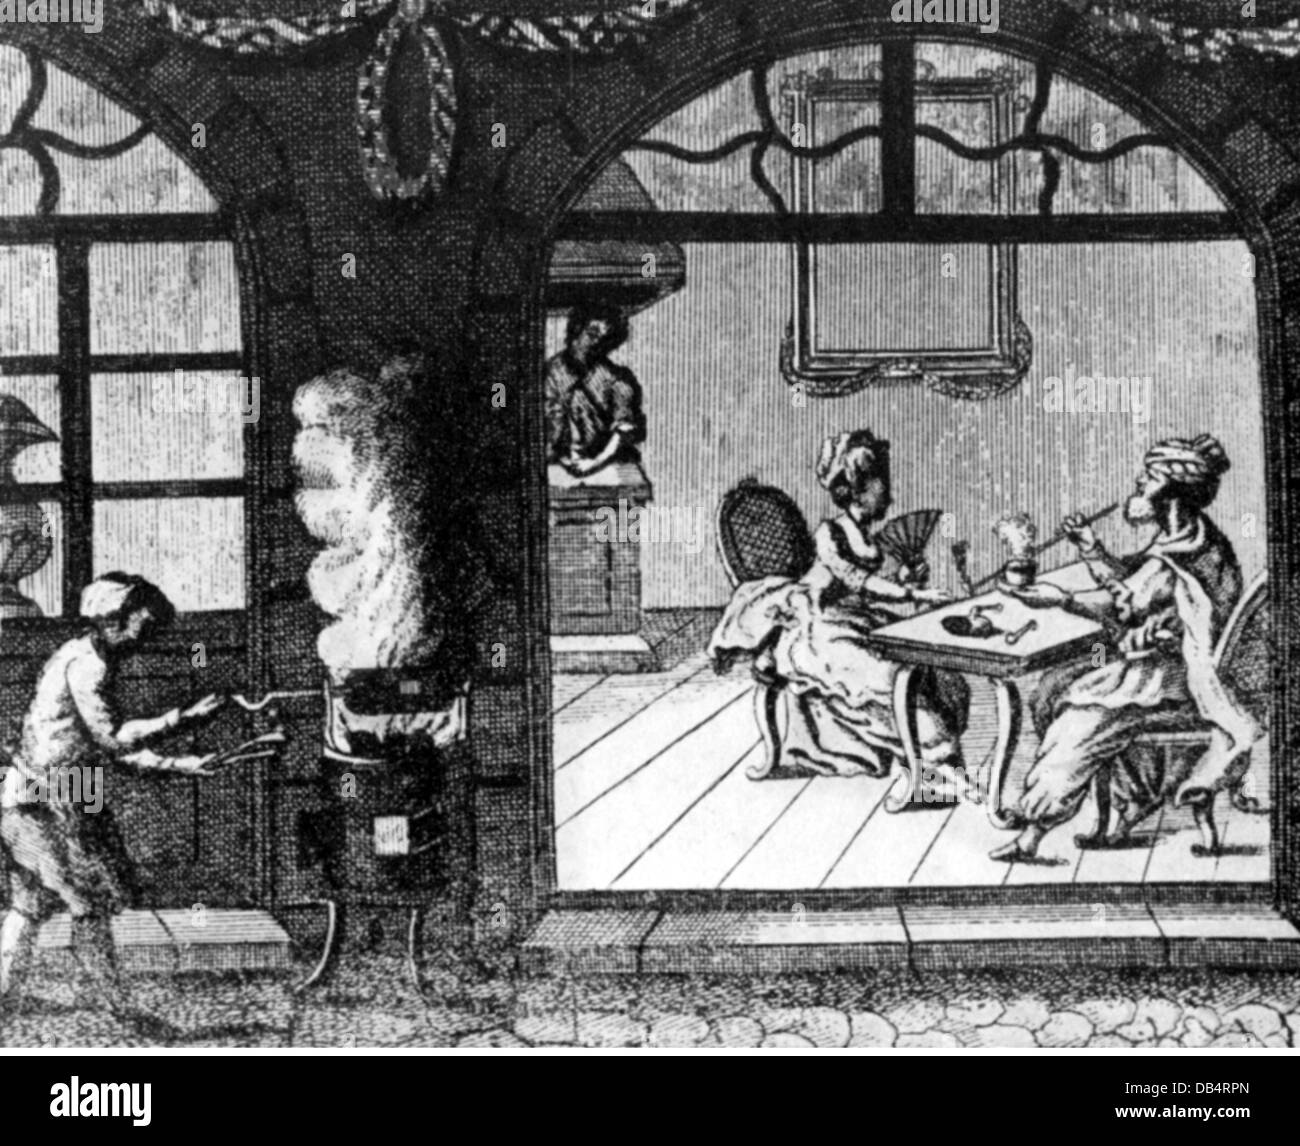 gastronomy, cafes / street cafes, lady and Turk in coffeeehouse, wood engraving, 19th century, 19th century, graphic, graphics, coffeeehouse, coffee shop, coffeee bar, coffeeehouses, coffeee bars, half length, sitting, sit, table, tables, fan, fans, smoking pipe, pipes, smoking, oven, ovens, smoke, steam, steaming, preparation, preparations, prepare, preparing, coffeee, beverage, beverages, drink, drinks, historic, historical, female, woman, male, man, men, people, women, Additional-Rights-Clearences-Not Available Stock Photo